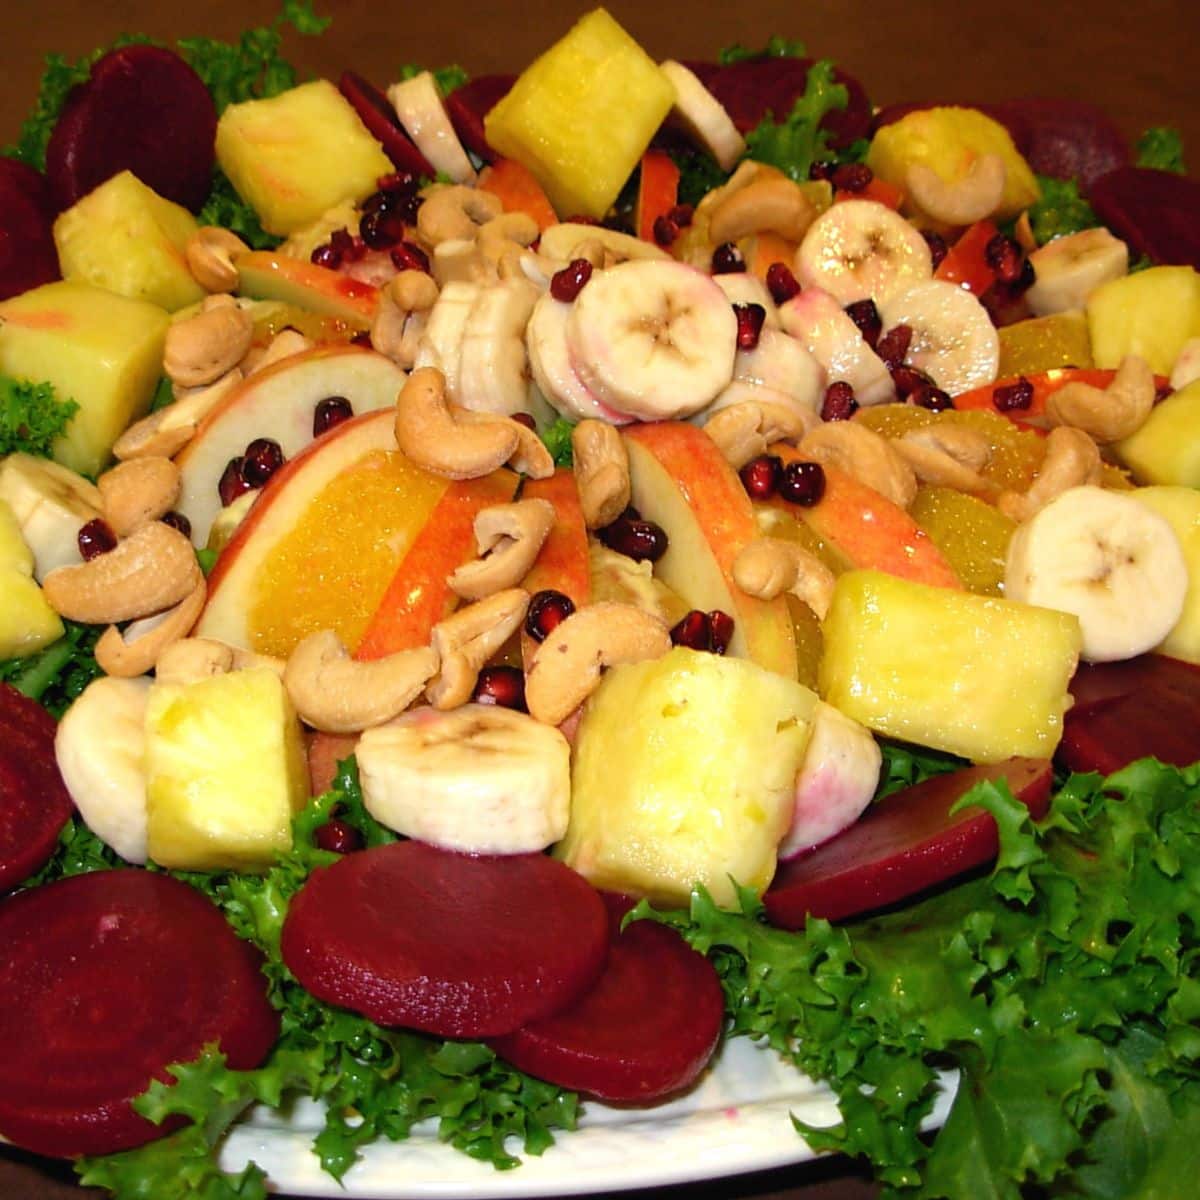 Christmas eve salad with fruits, vegetables and nuts